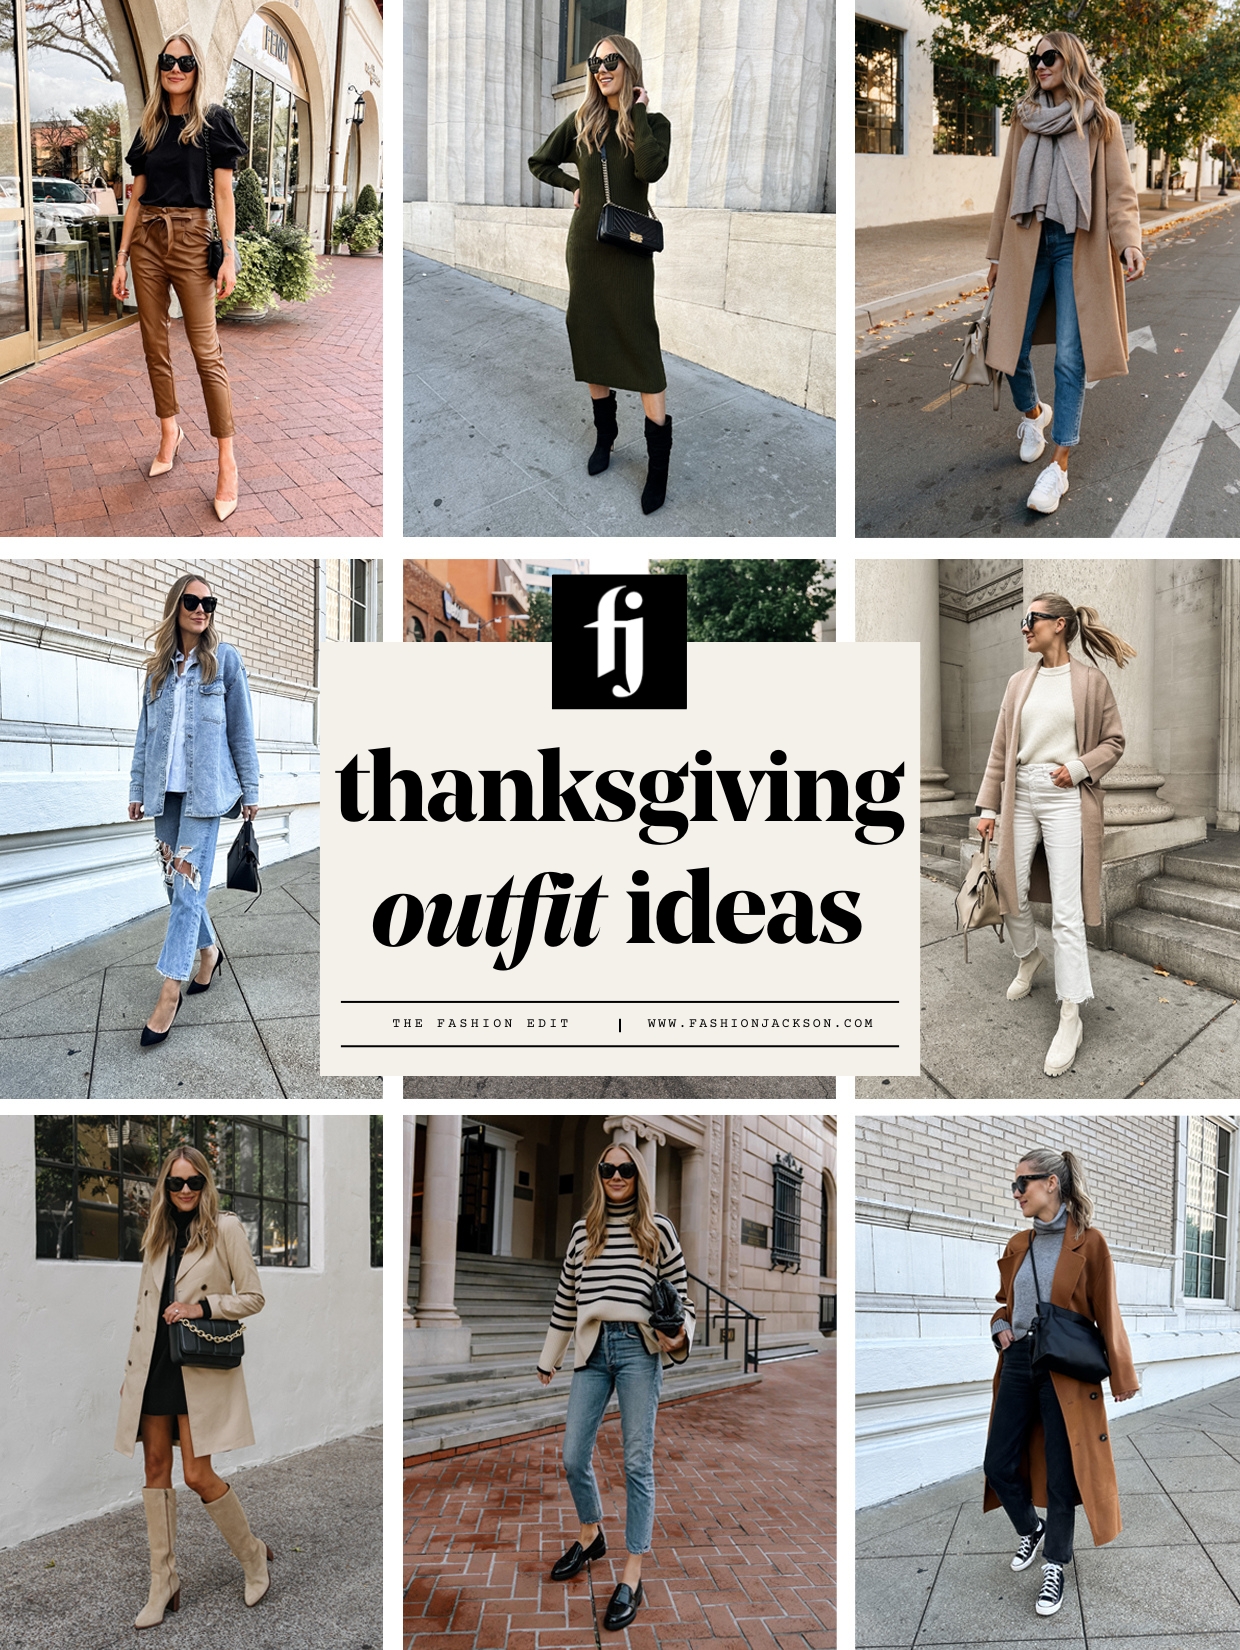 17 Outfit Ideas To Be the Best Dressed Guest for Thanksgiving